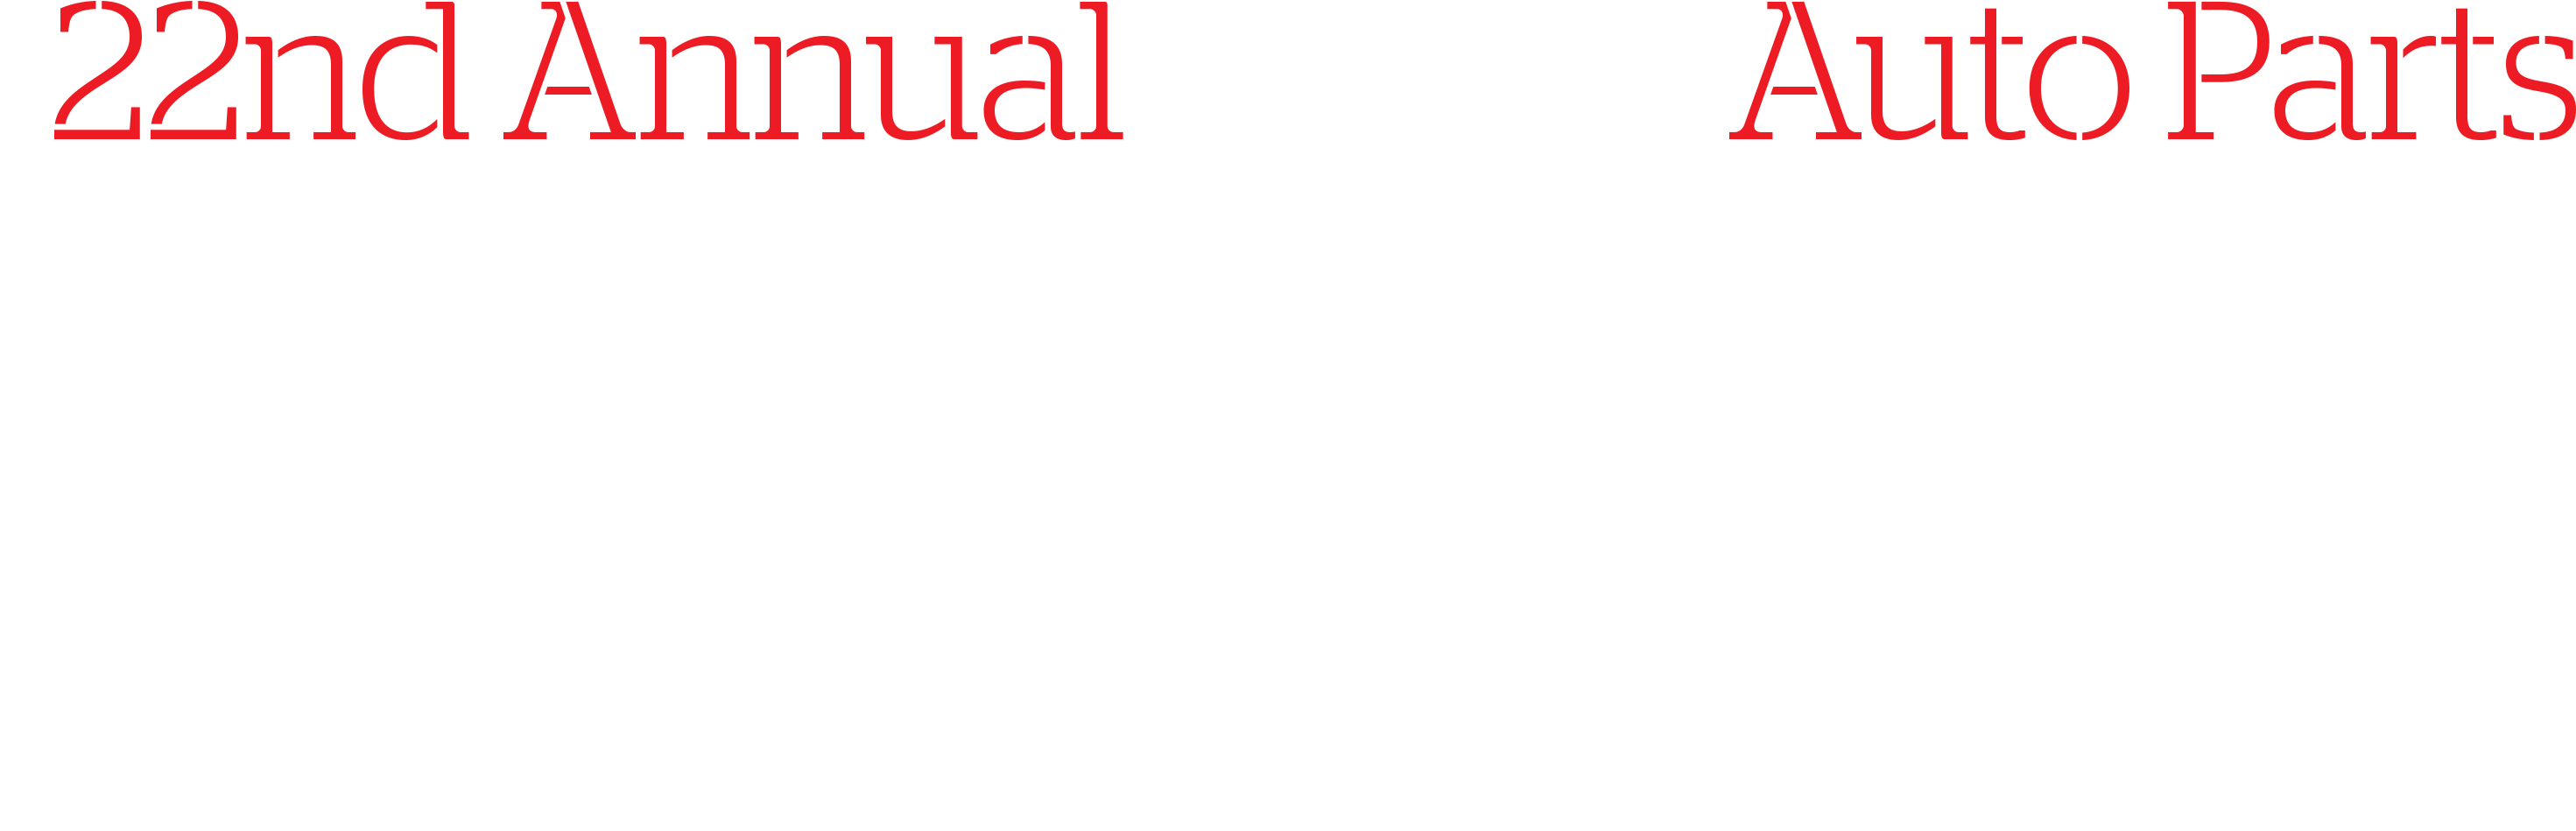 22nd Annual NAPA Auto Parts Syracuse Nationals title image